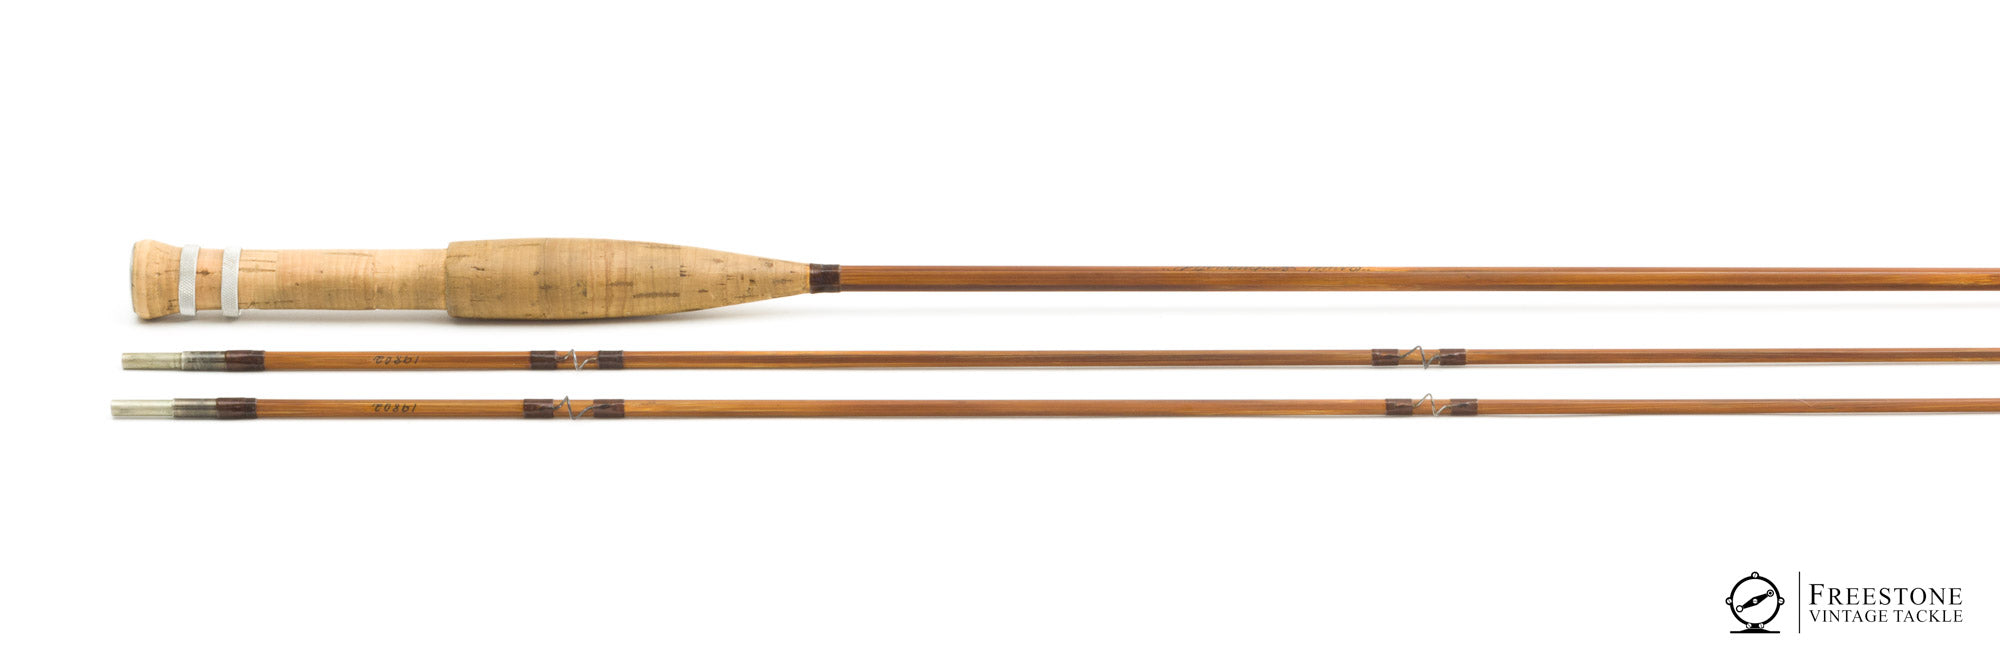 Orvis - Deluxe 6'6 2/2 6wt Bamboo Rod - Freestone Vintage Tackle